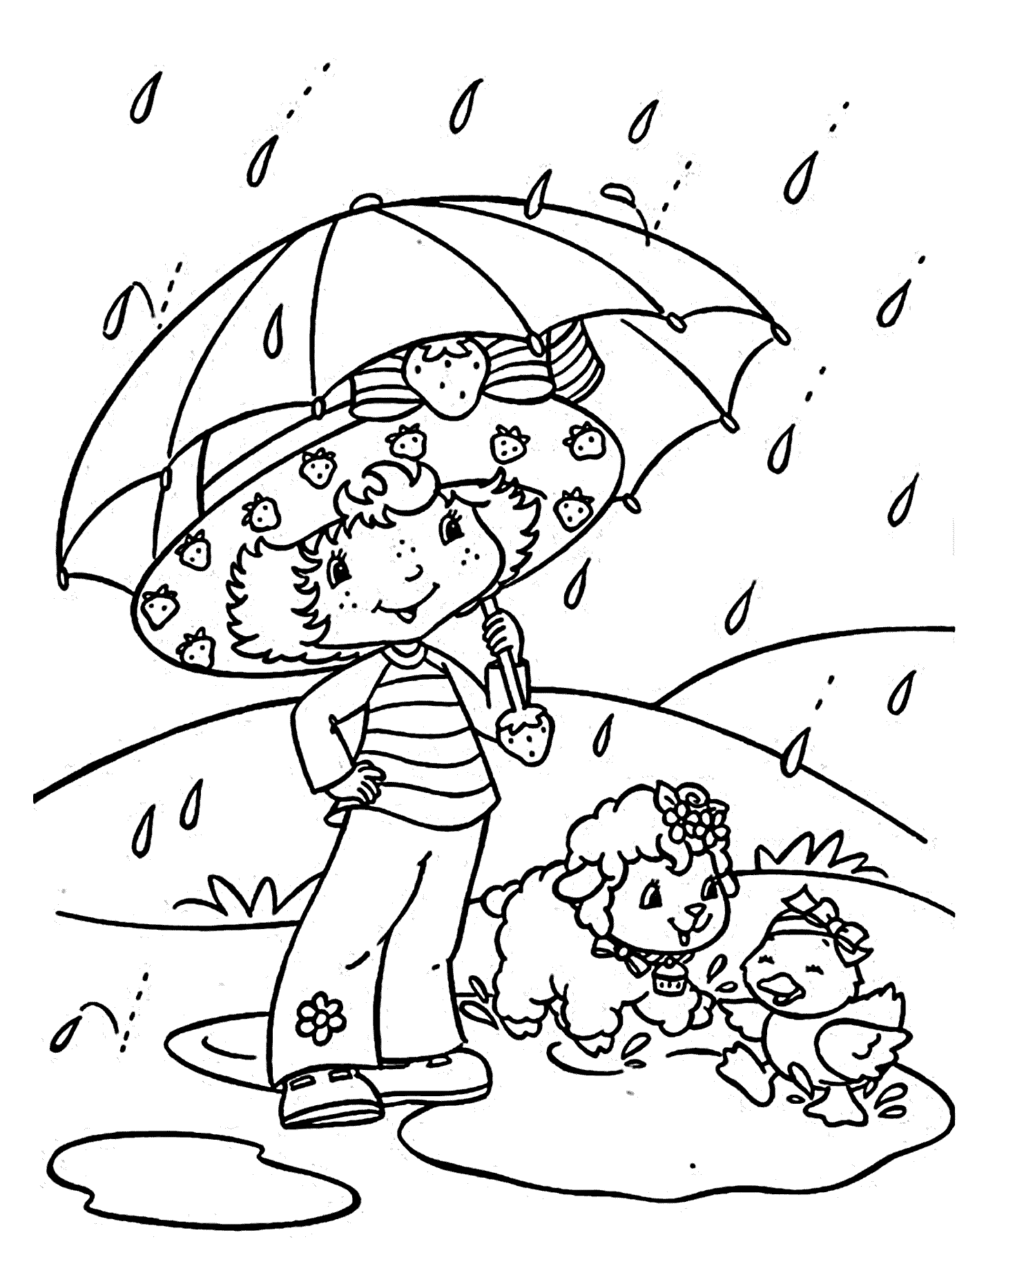 Rainy Day Drawing For Kids at GetDrawings | Free download